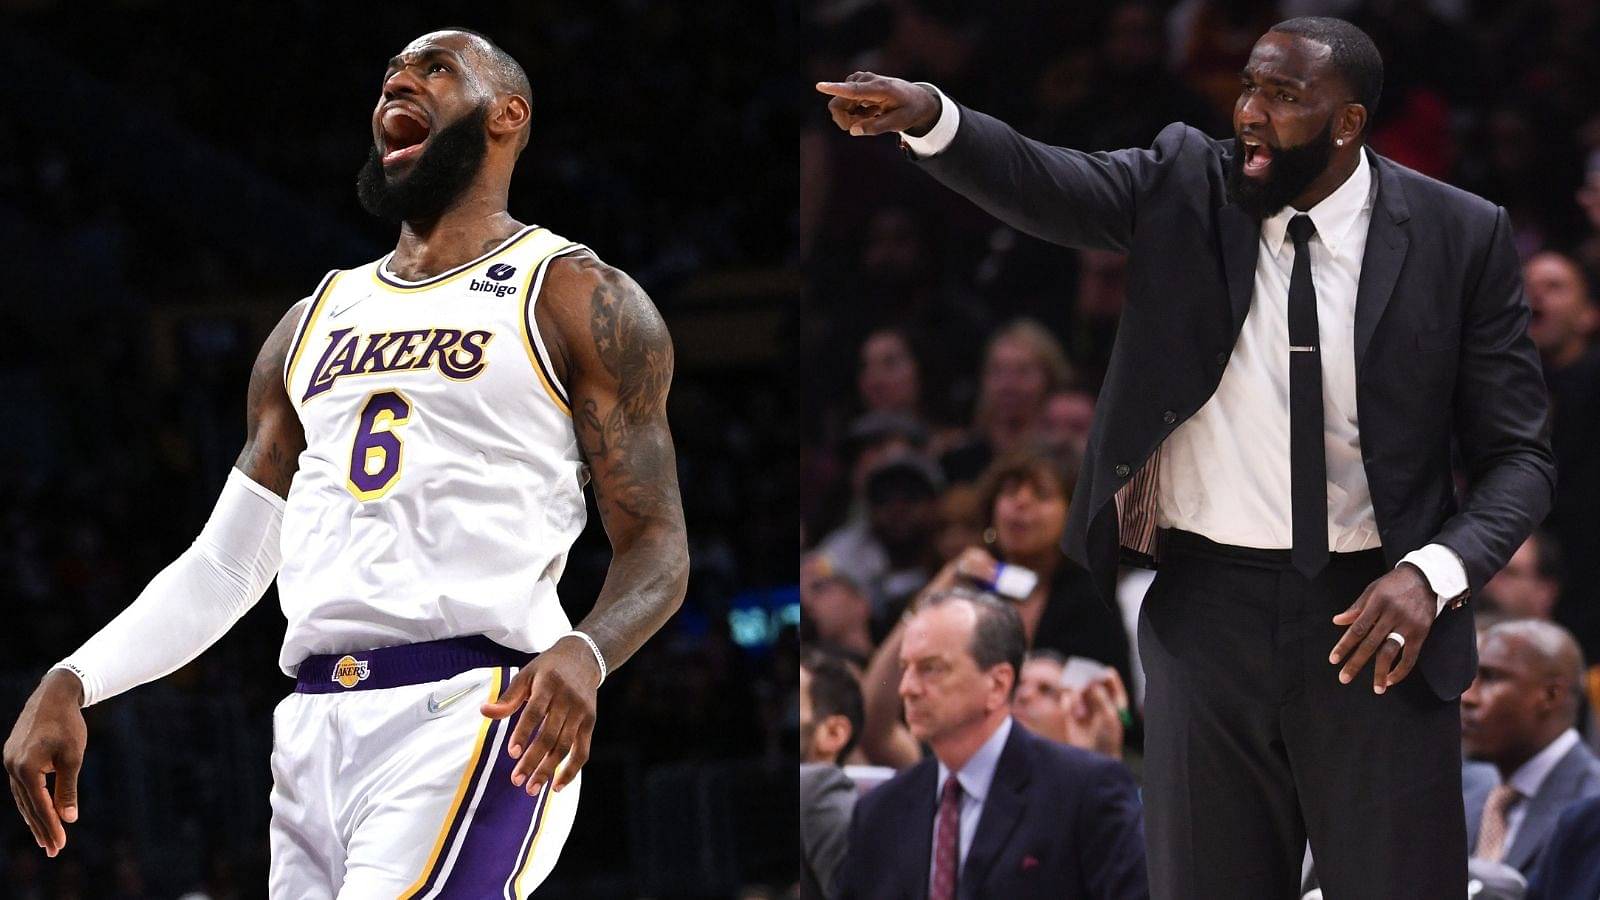 "LeBron James With Another Defy the Impossible Performance!": Kendrick Perkins Praises 'The King' as Lakers Overcome 25-Point Deficit